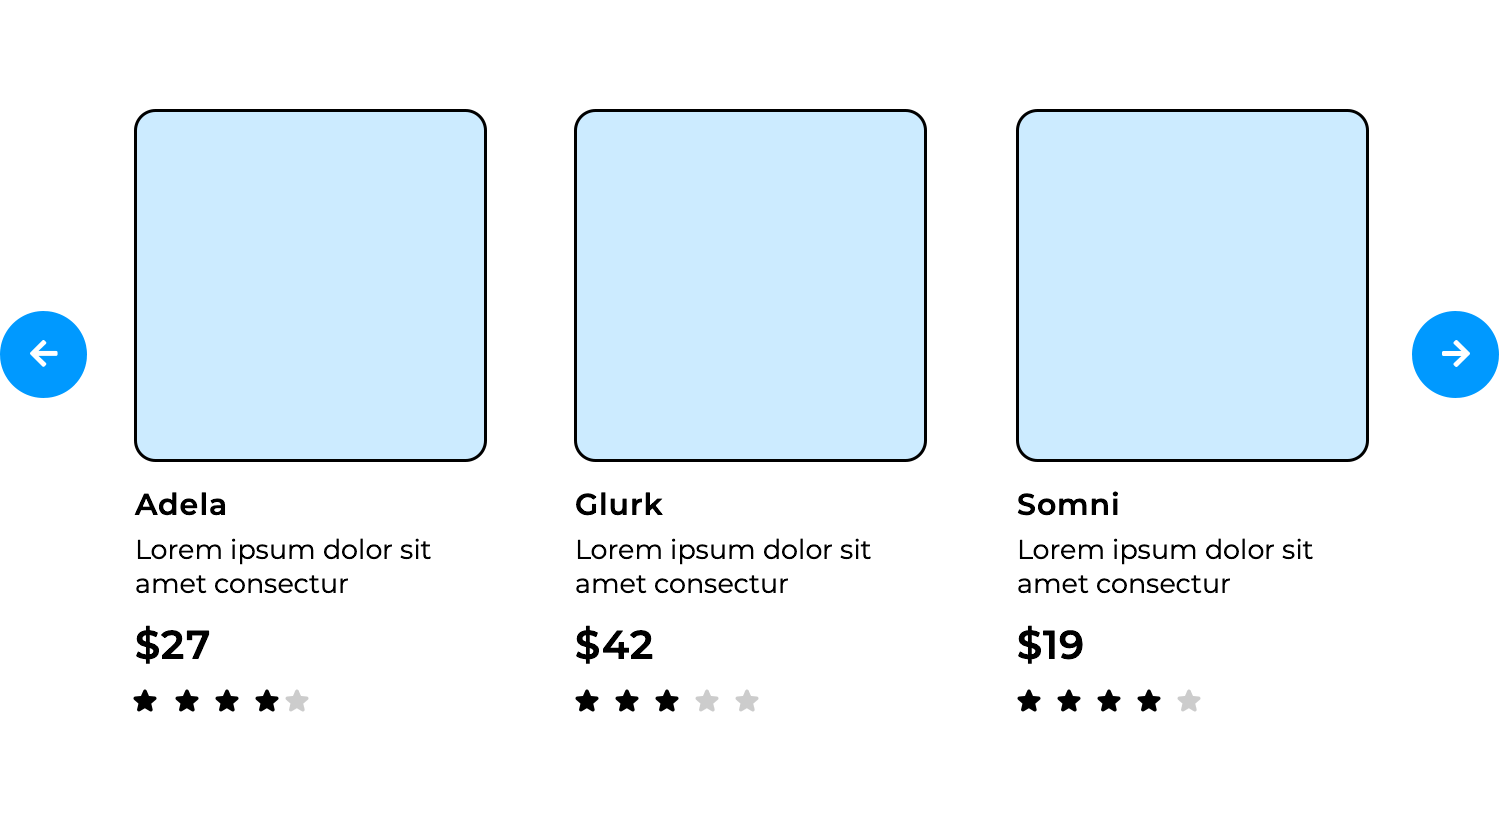 Carousel slider showing three product cards with names, descriptions, prices, and ratings